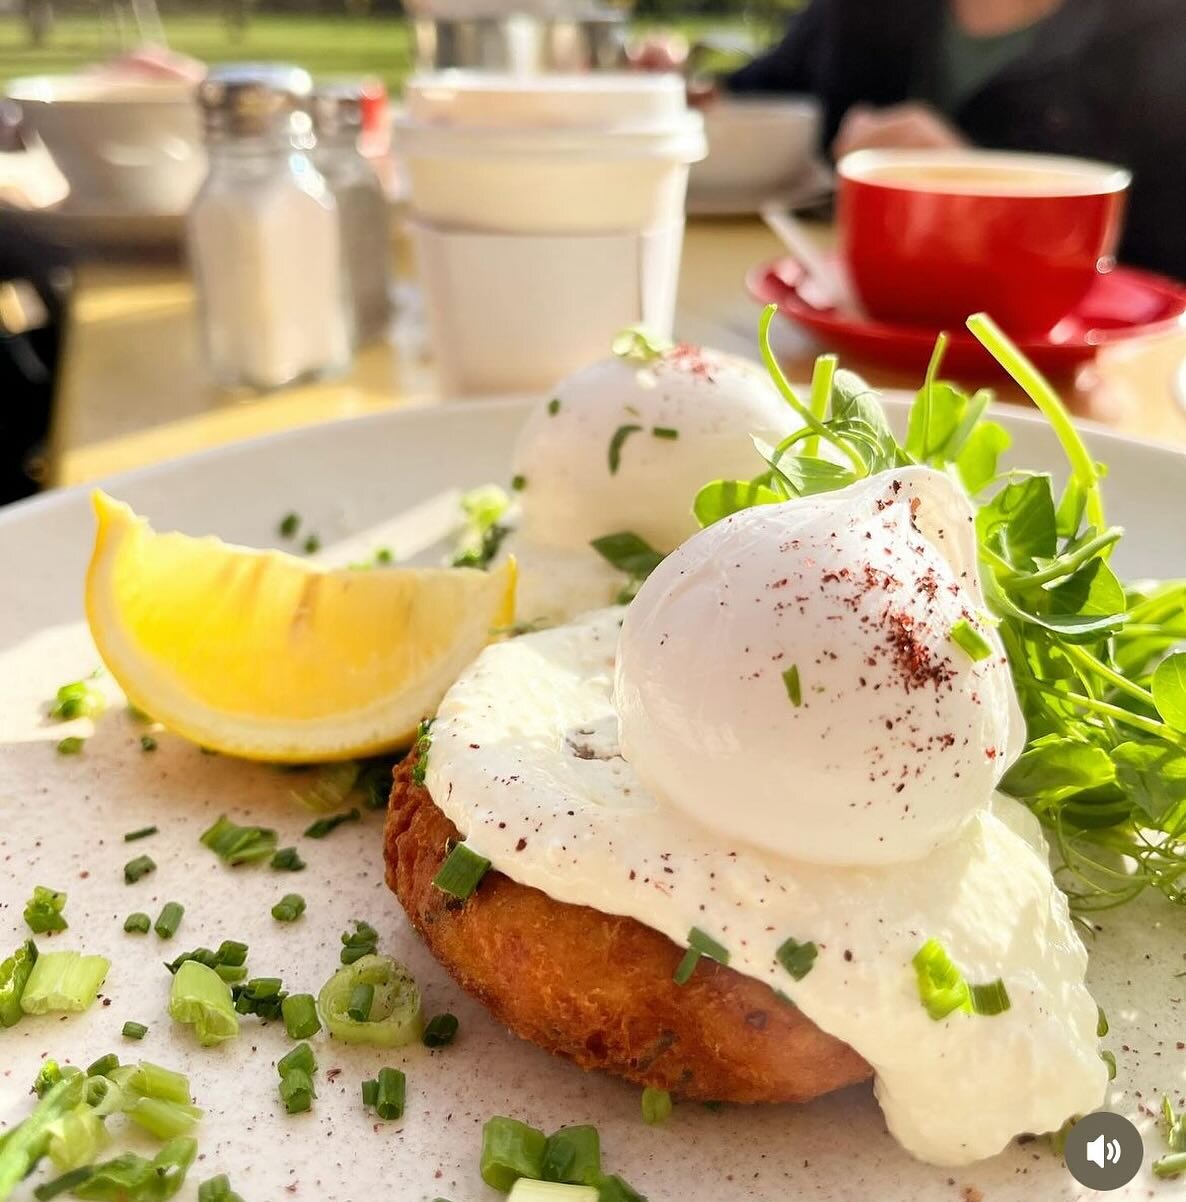 Life is better with brunch and good company @thehubvictoriapark 

#homemadefood #homemaderosties #rosti #r&ouml;sti #homemadecakes #victoriaparkmarket #victoriaparklondon #eastlondonfood #eastlondonlife #eastlondonmums #eastlondondogs #dogfriendly #k